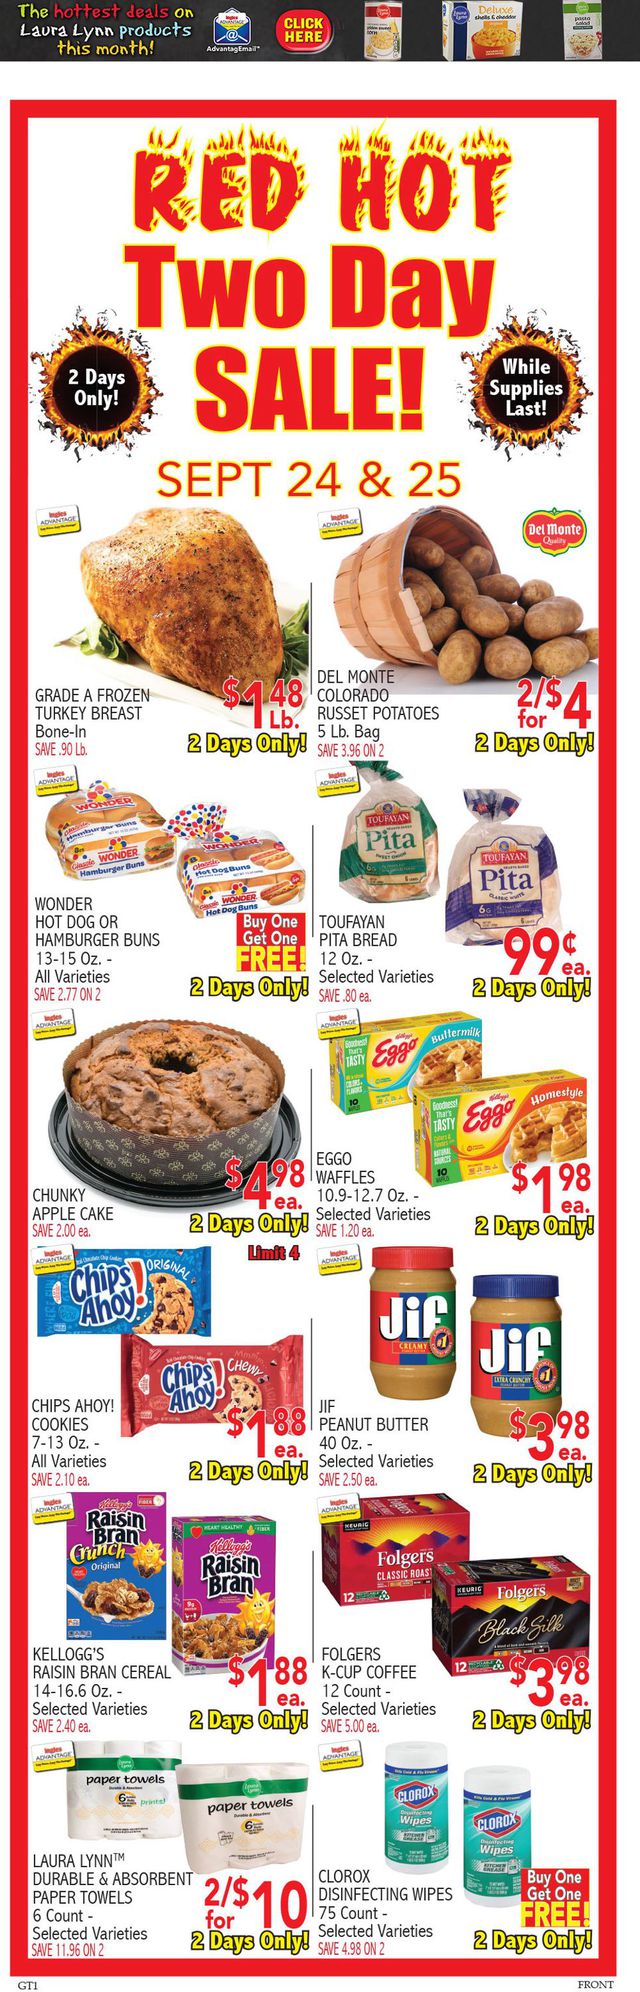 Ingles Ad from 09/22/2021